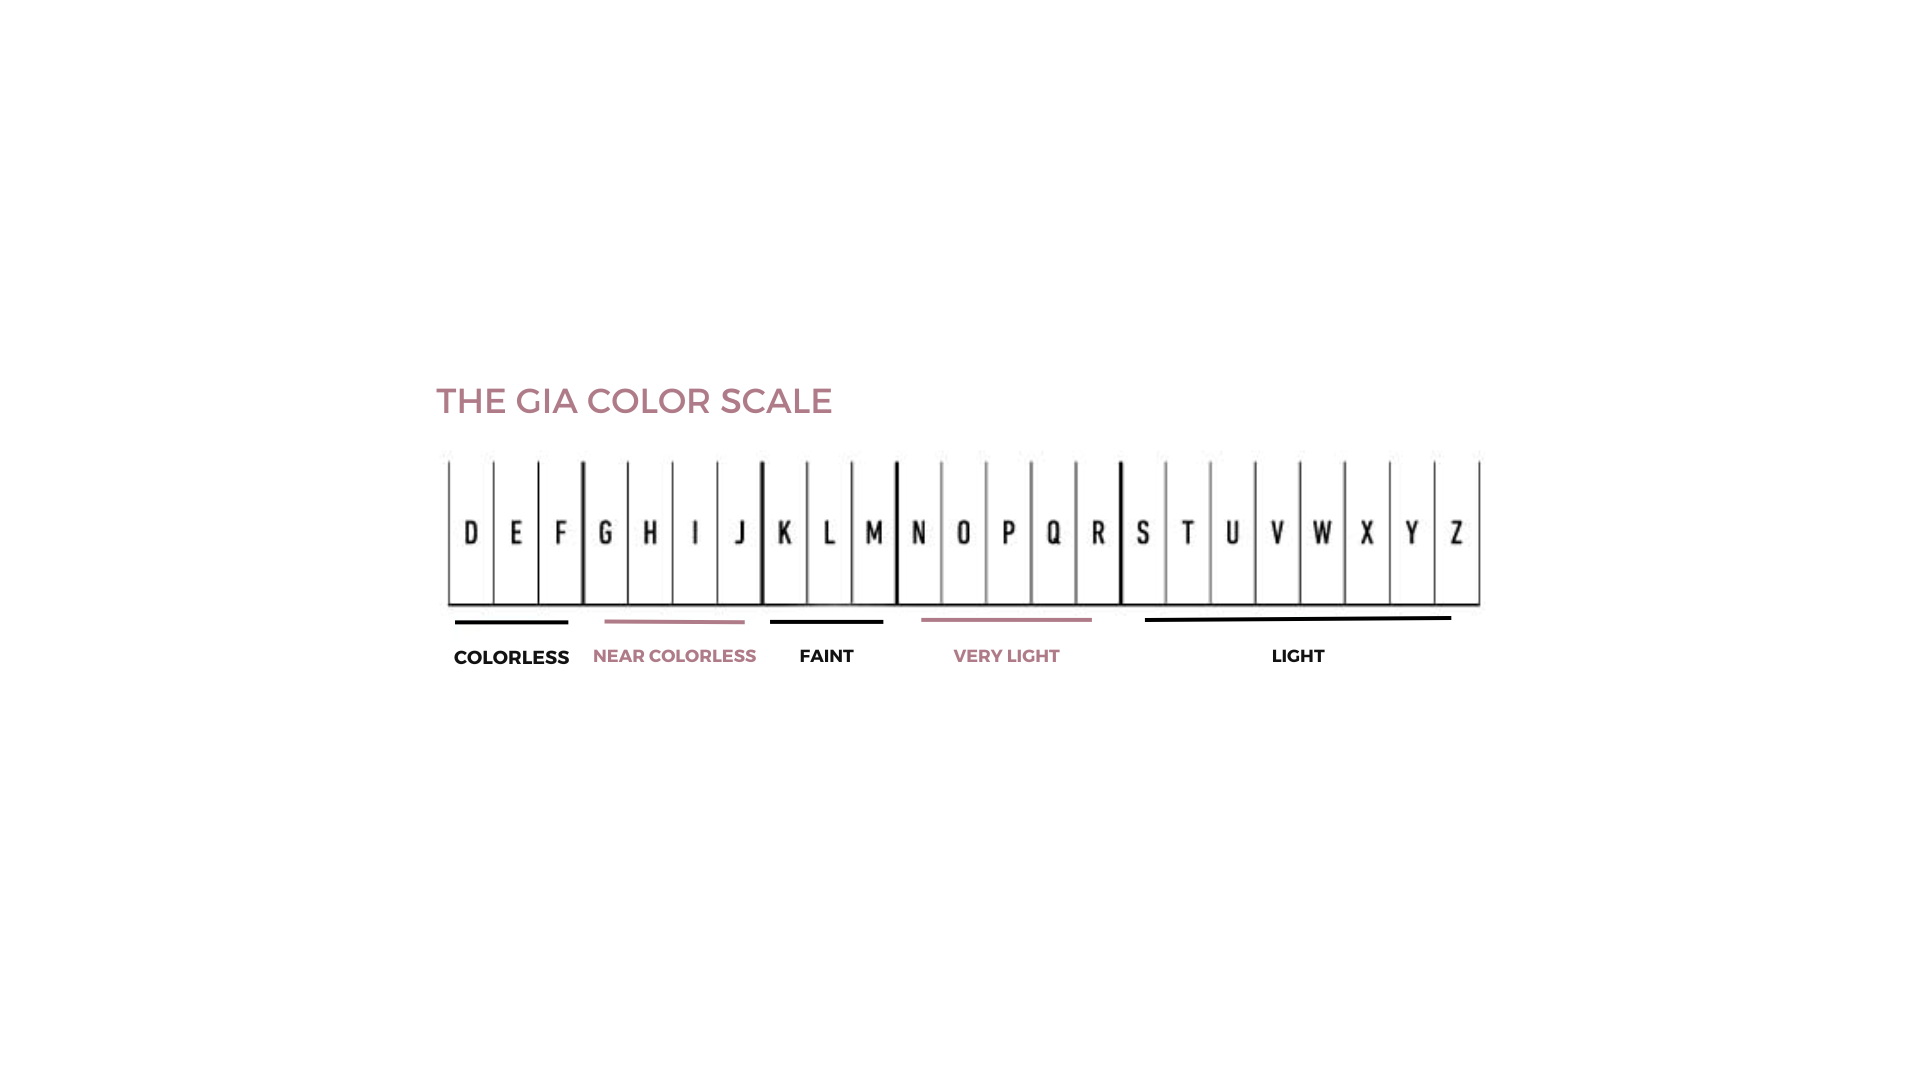 THE_GIA_COLOR_SCALE_2.png